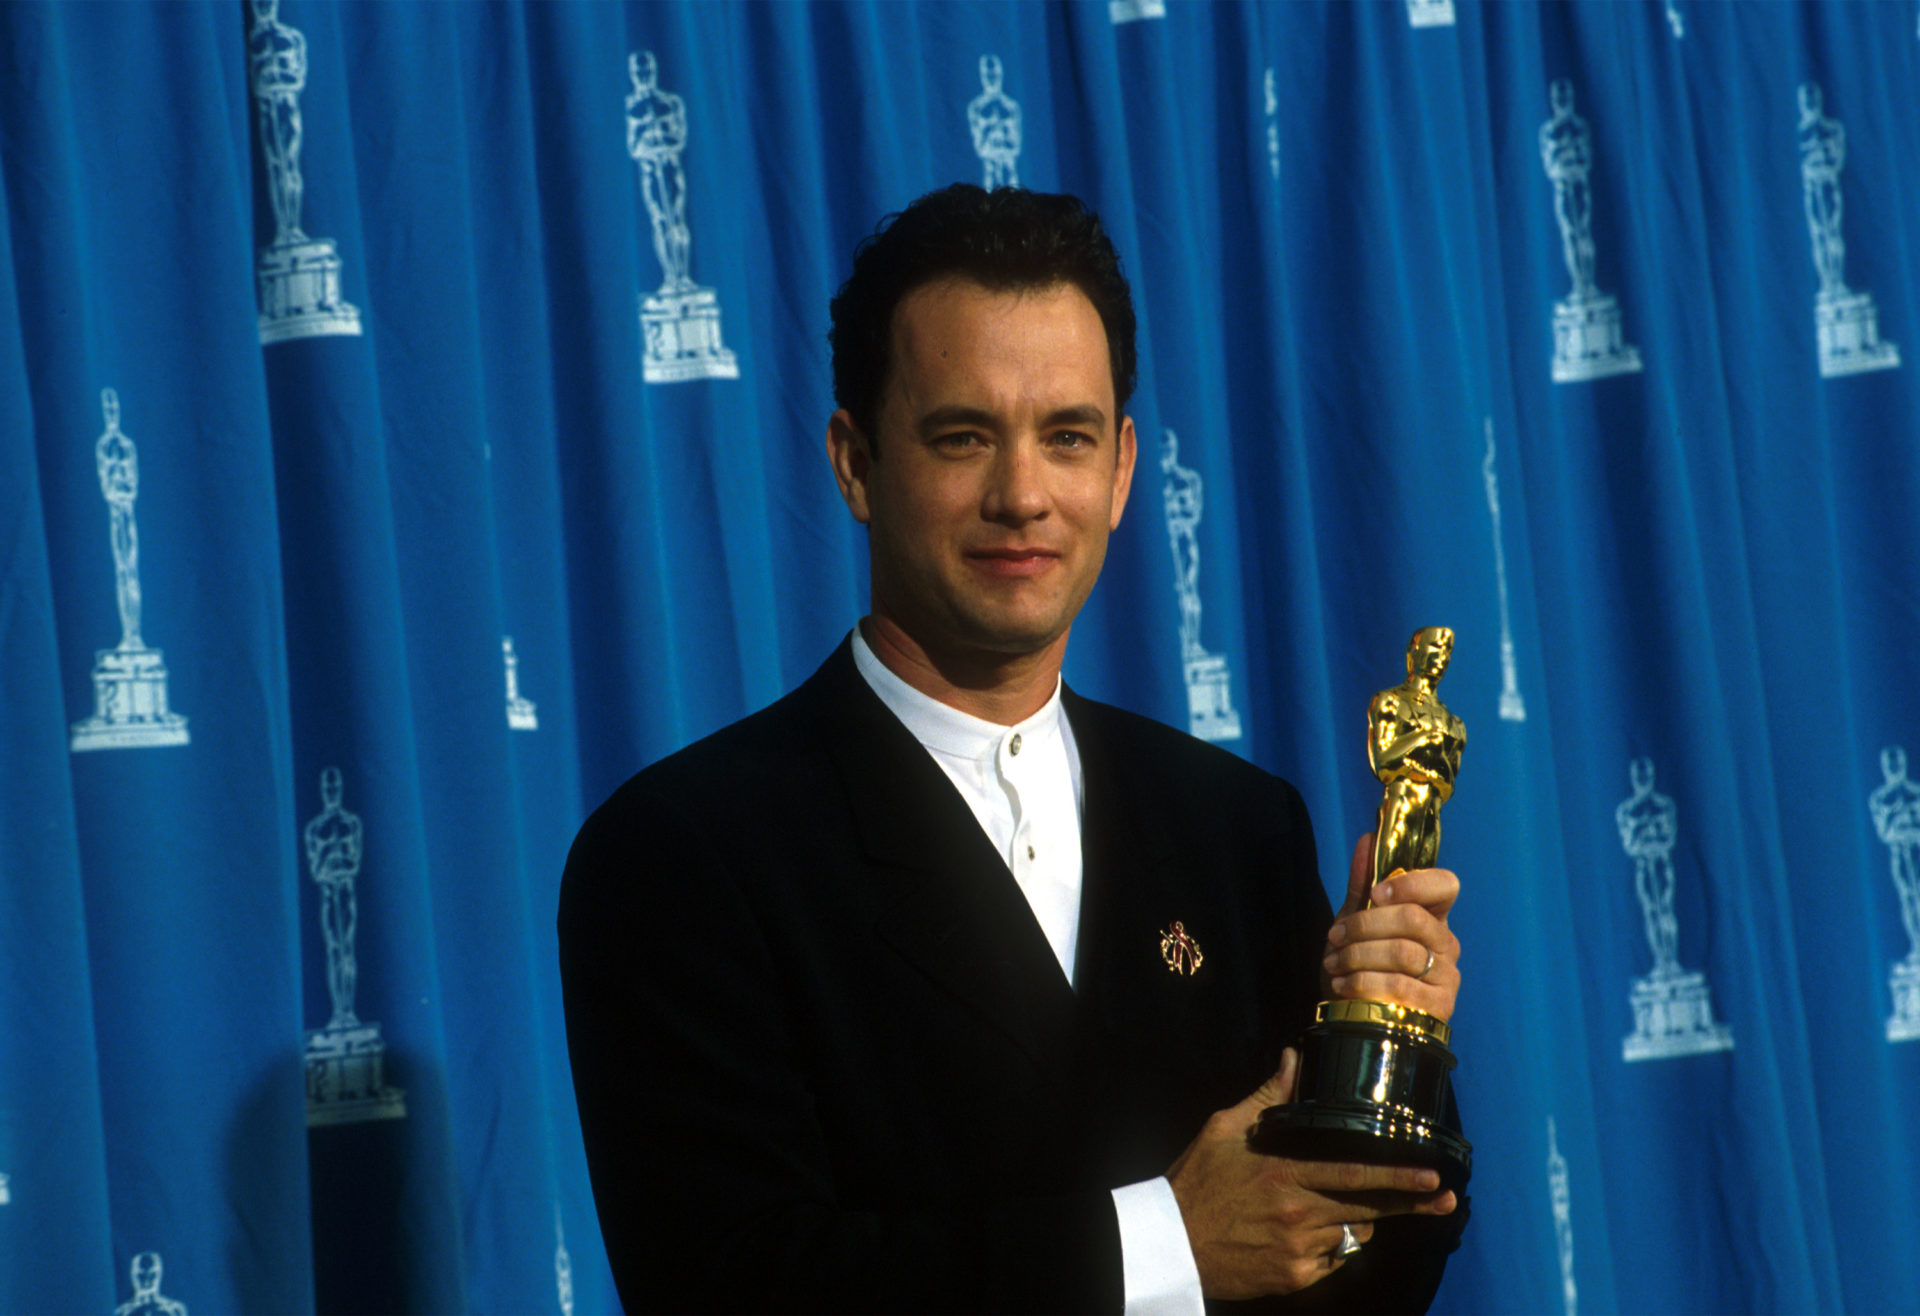 Tom Hanks at the 67th Academy Awards